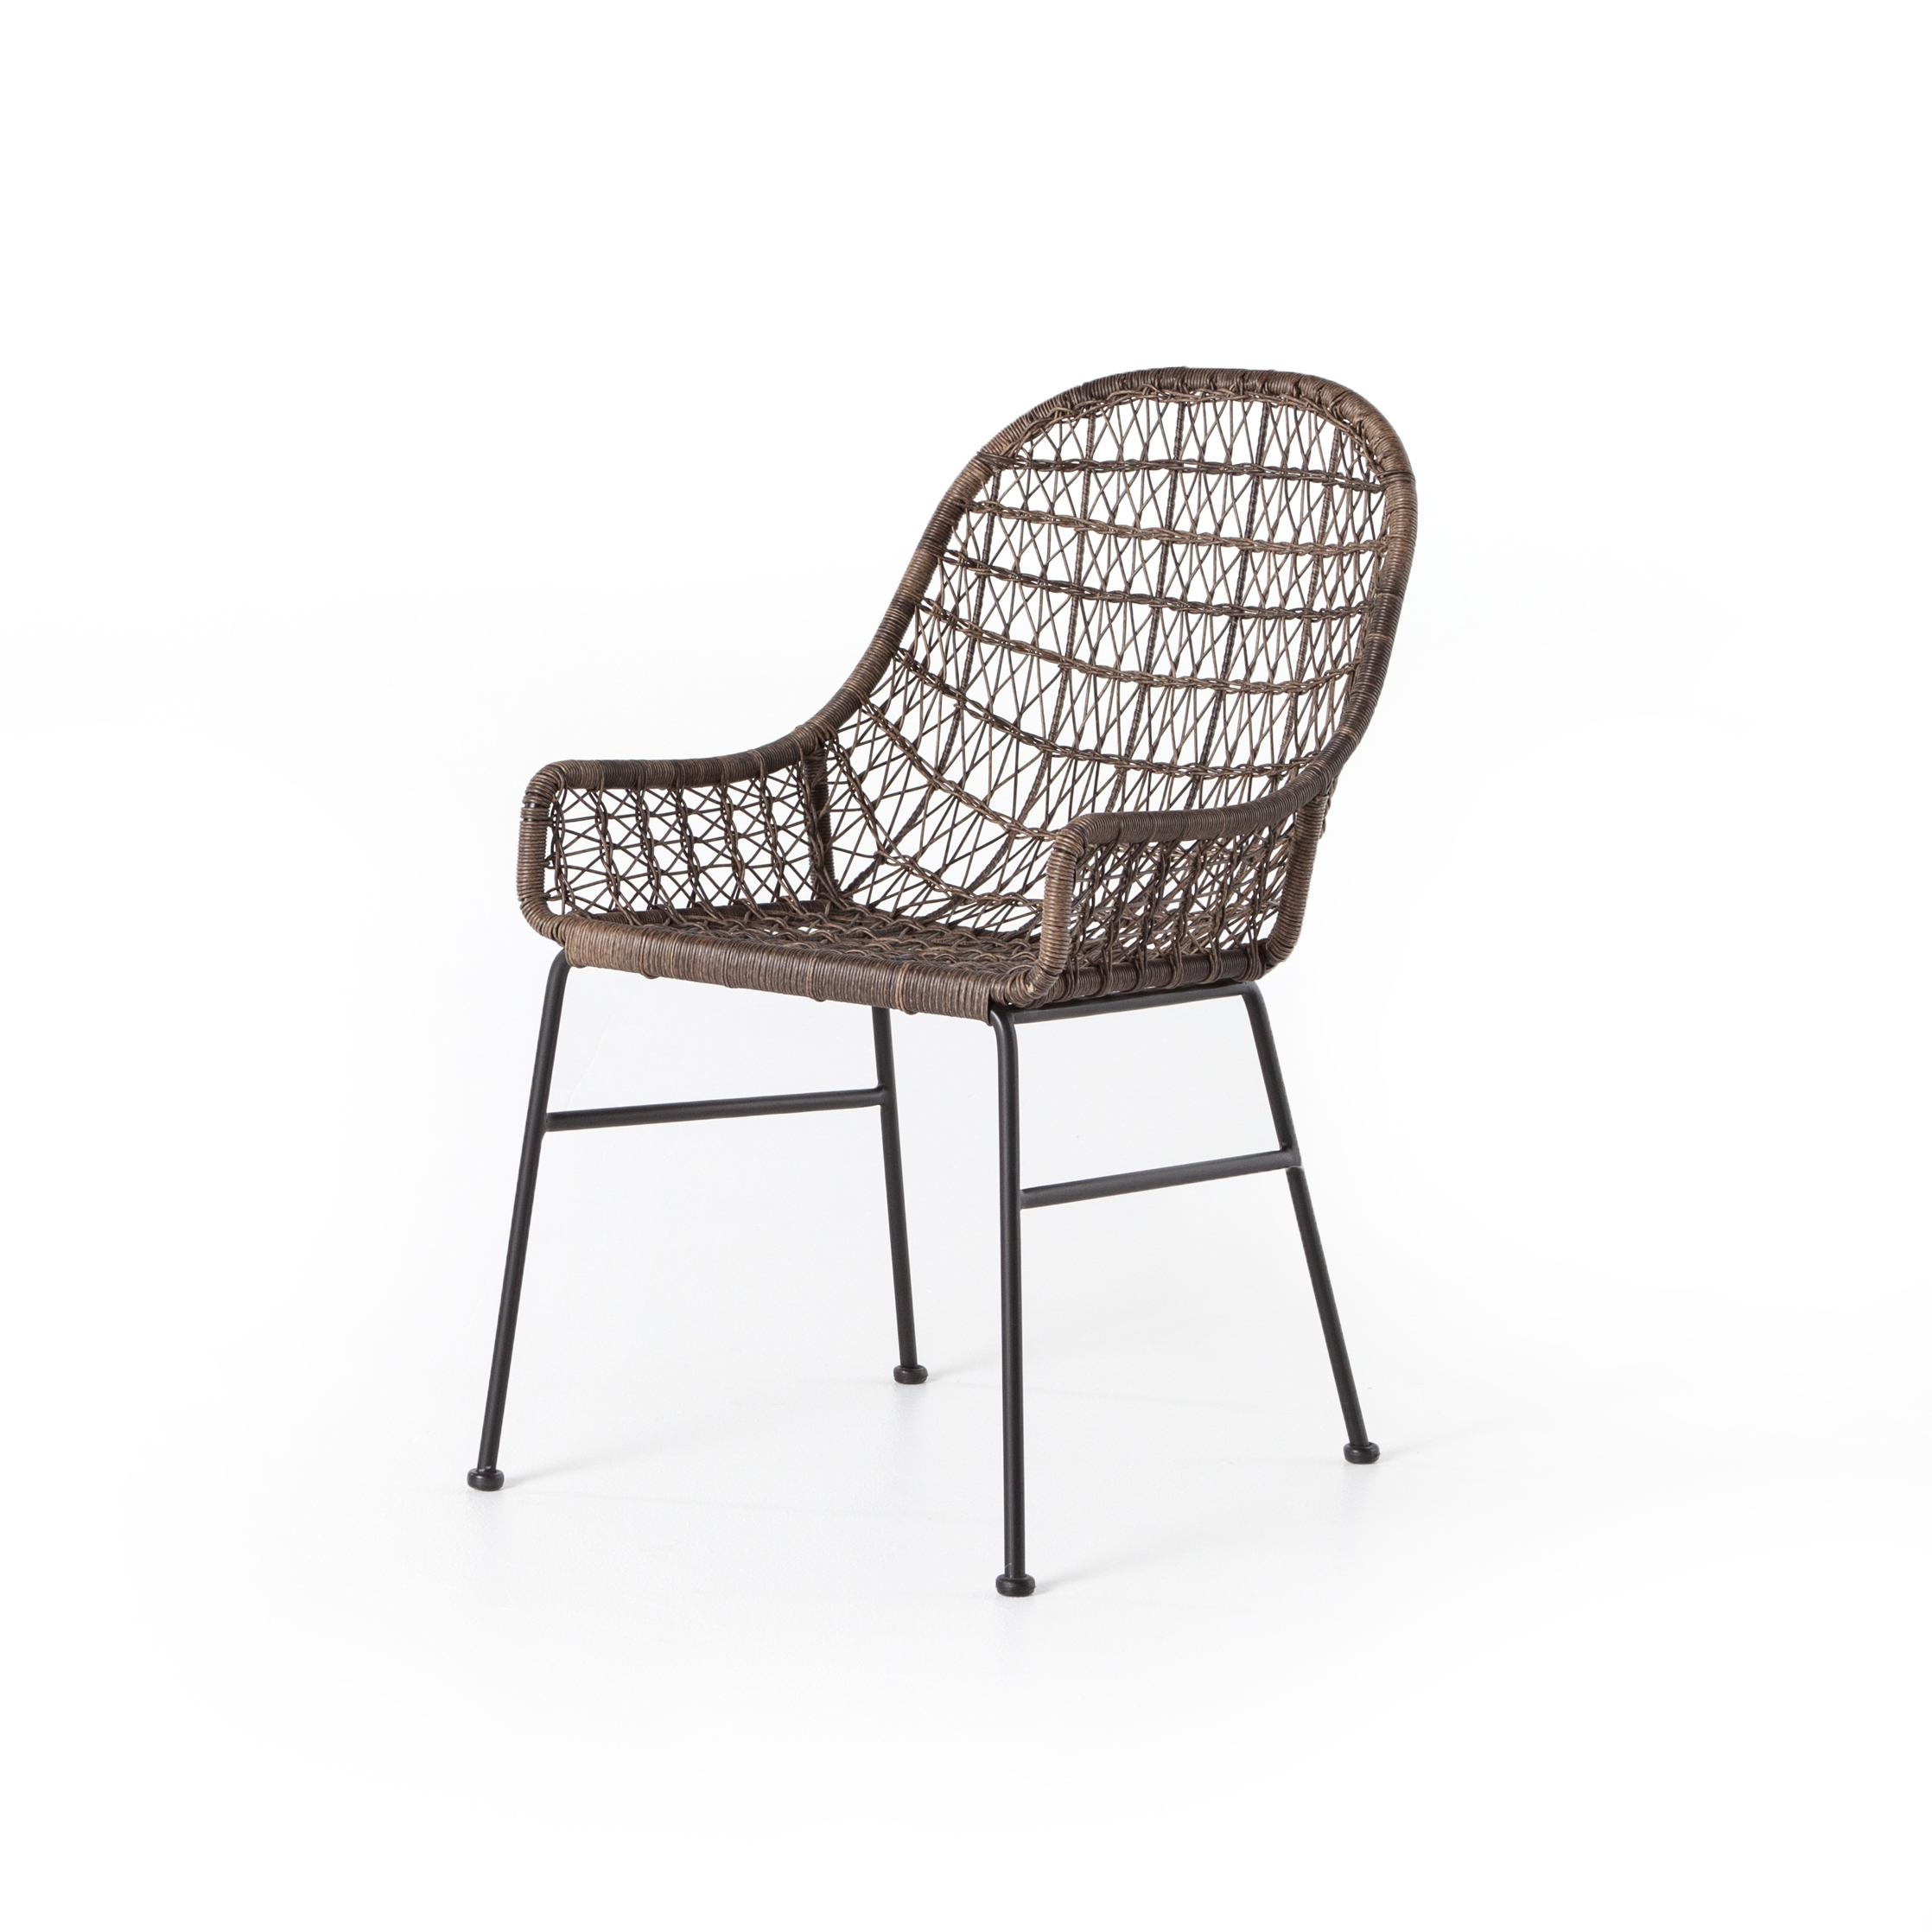 Bandera Woven Outdoor Dining Chair